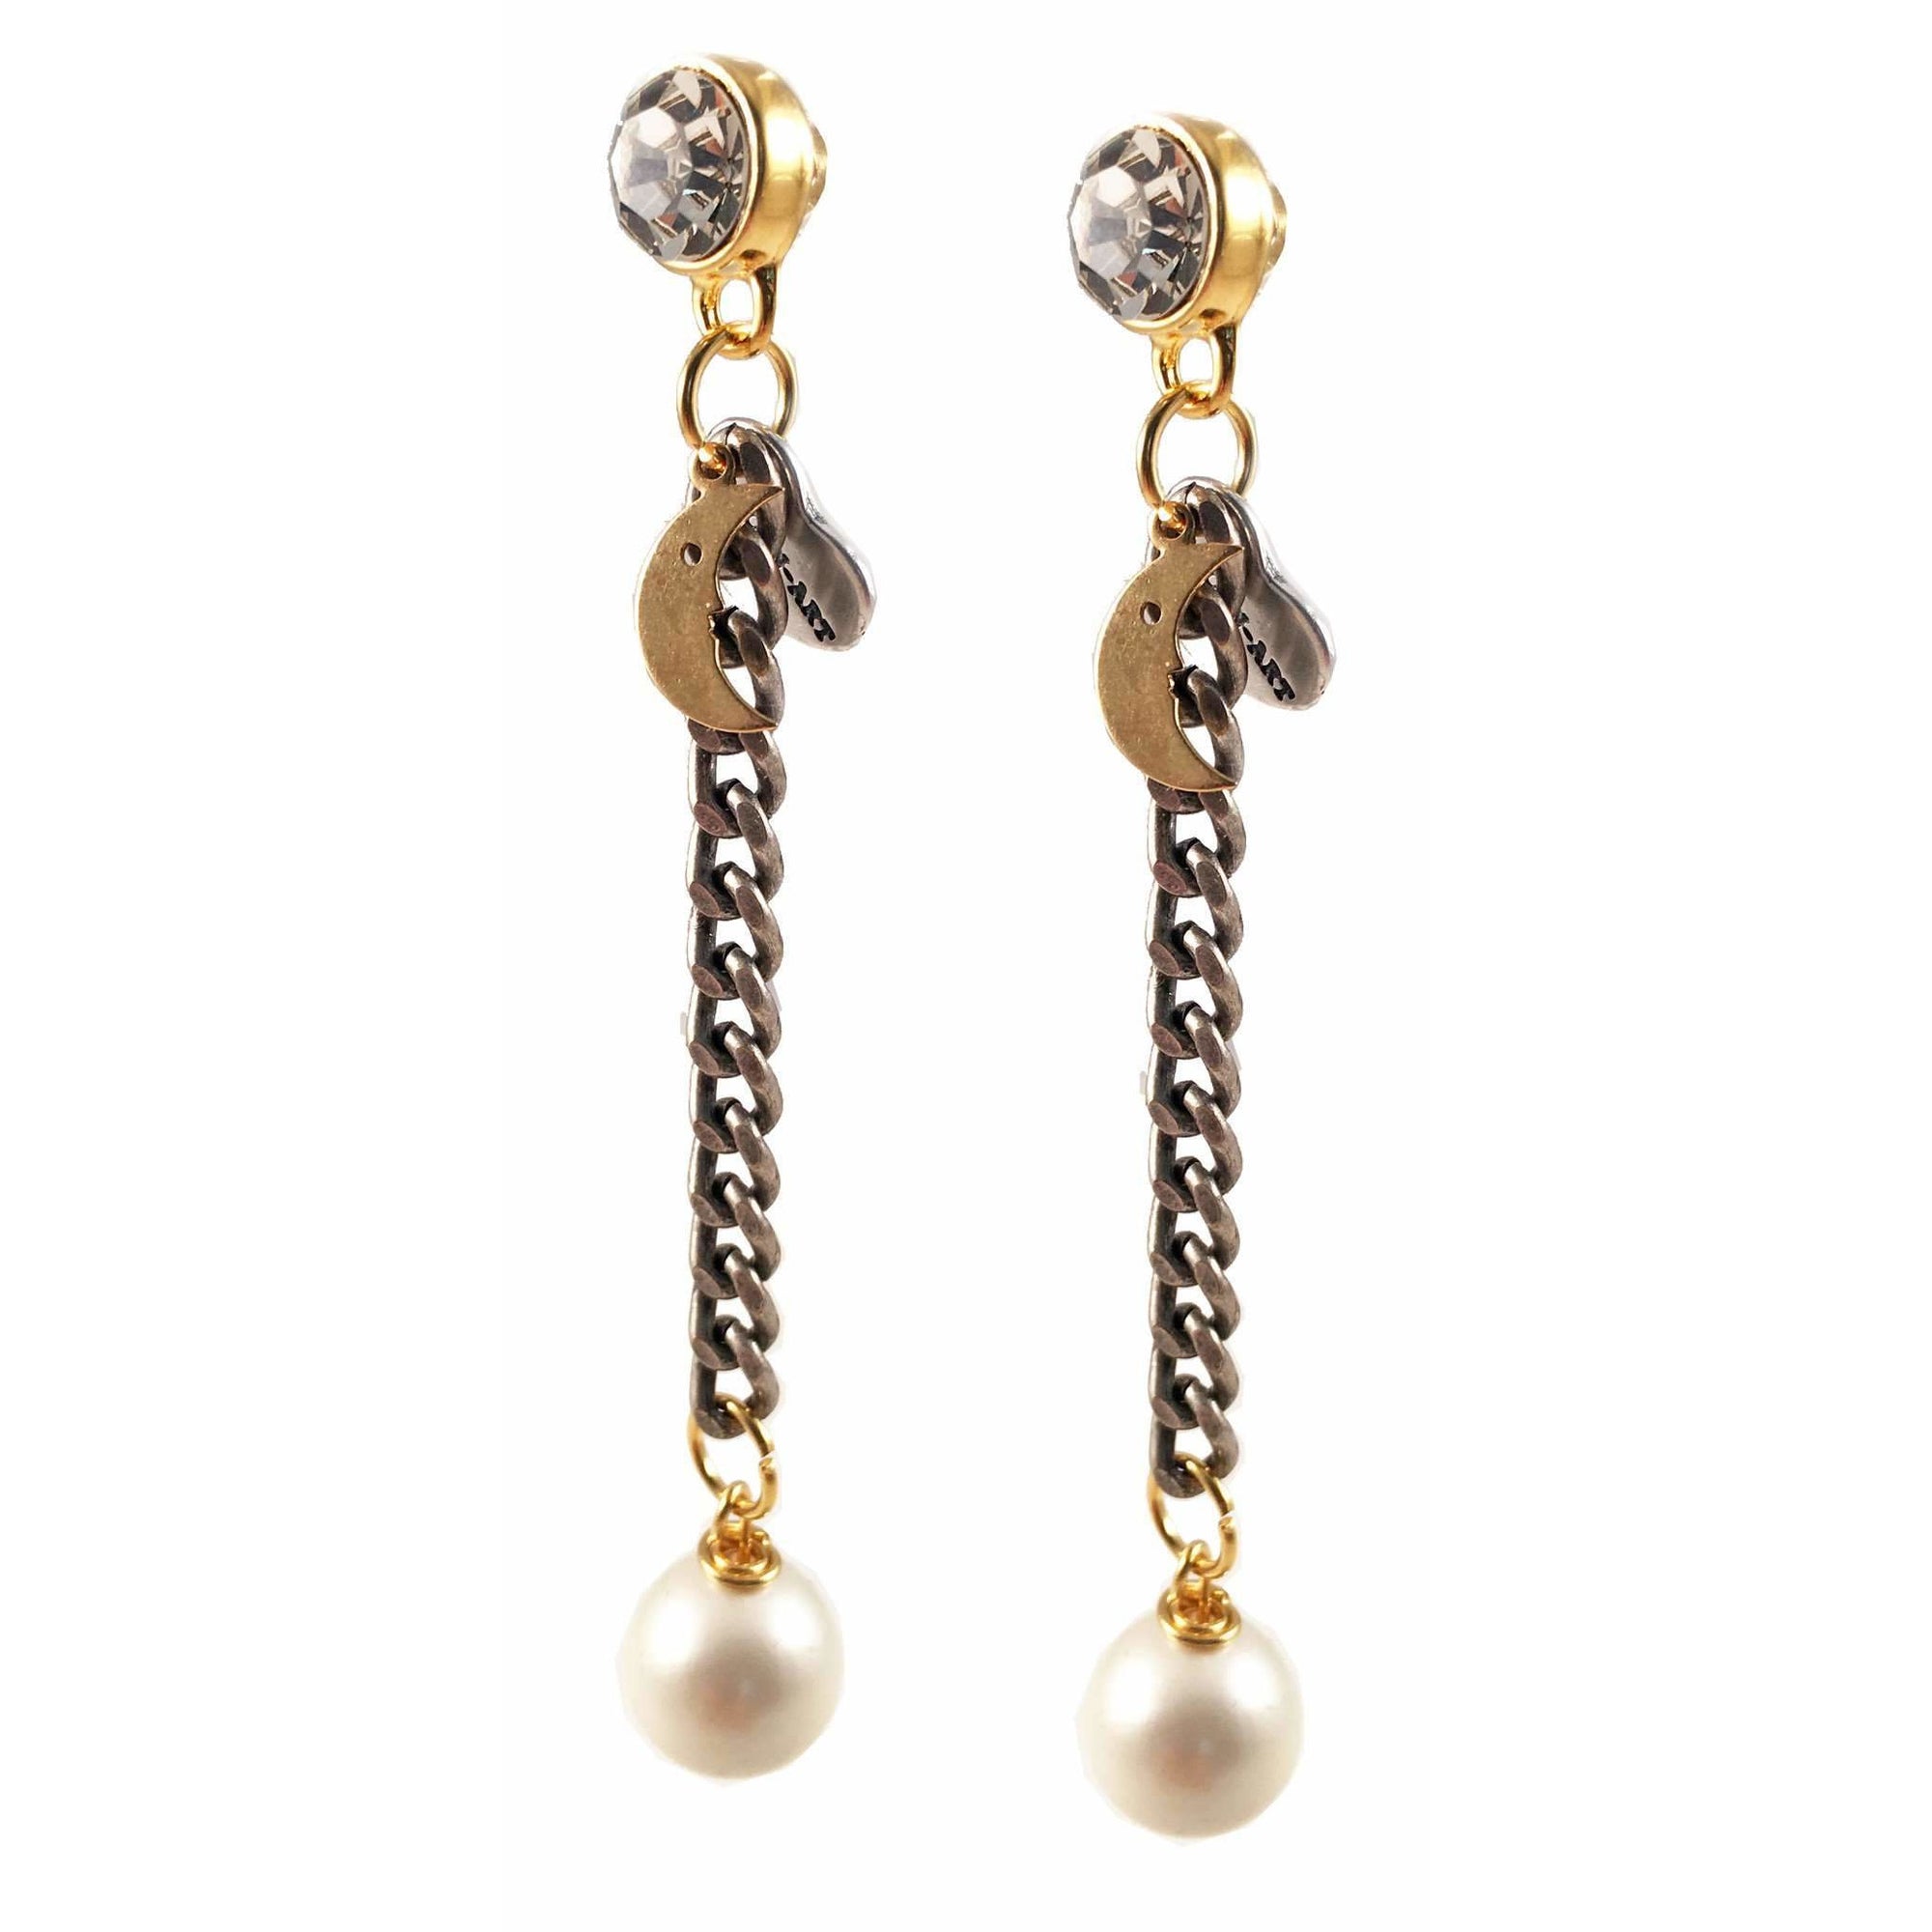 White Pearls and Crystals Dangle and Drop Earrings - Miraposa